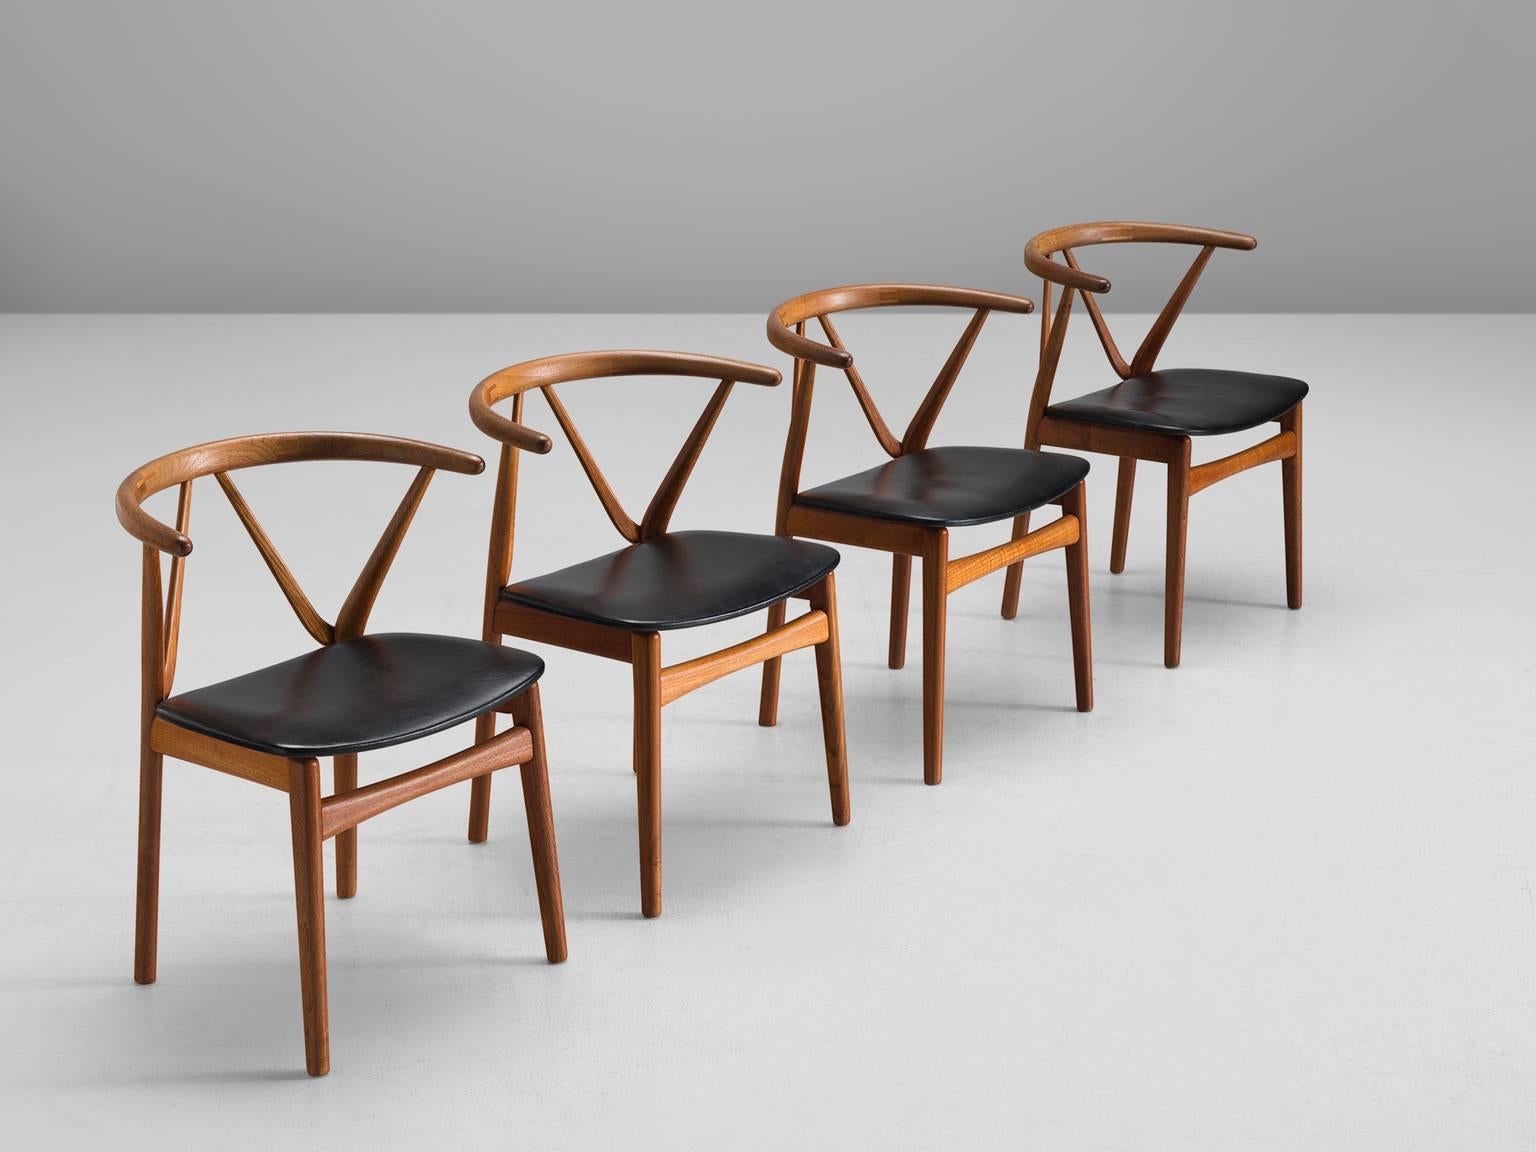 Set of four dining chairs model 255, in teak and faux-leather by Henning Kjaernulf for Bruno Hansen, Denmark, 1950s. 

Set of four elegant dining chairs with strong resemblance to the designs of Hans Wegner. These solid teak chairs have a beautiful